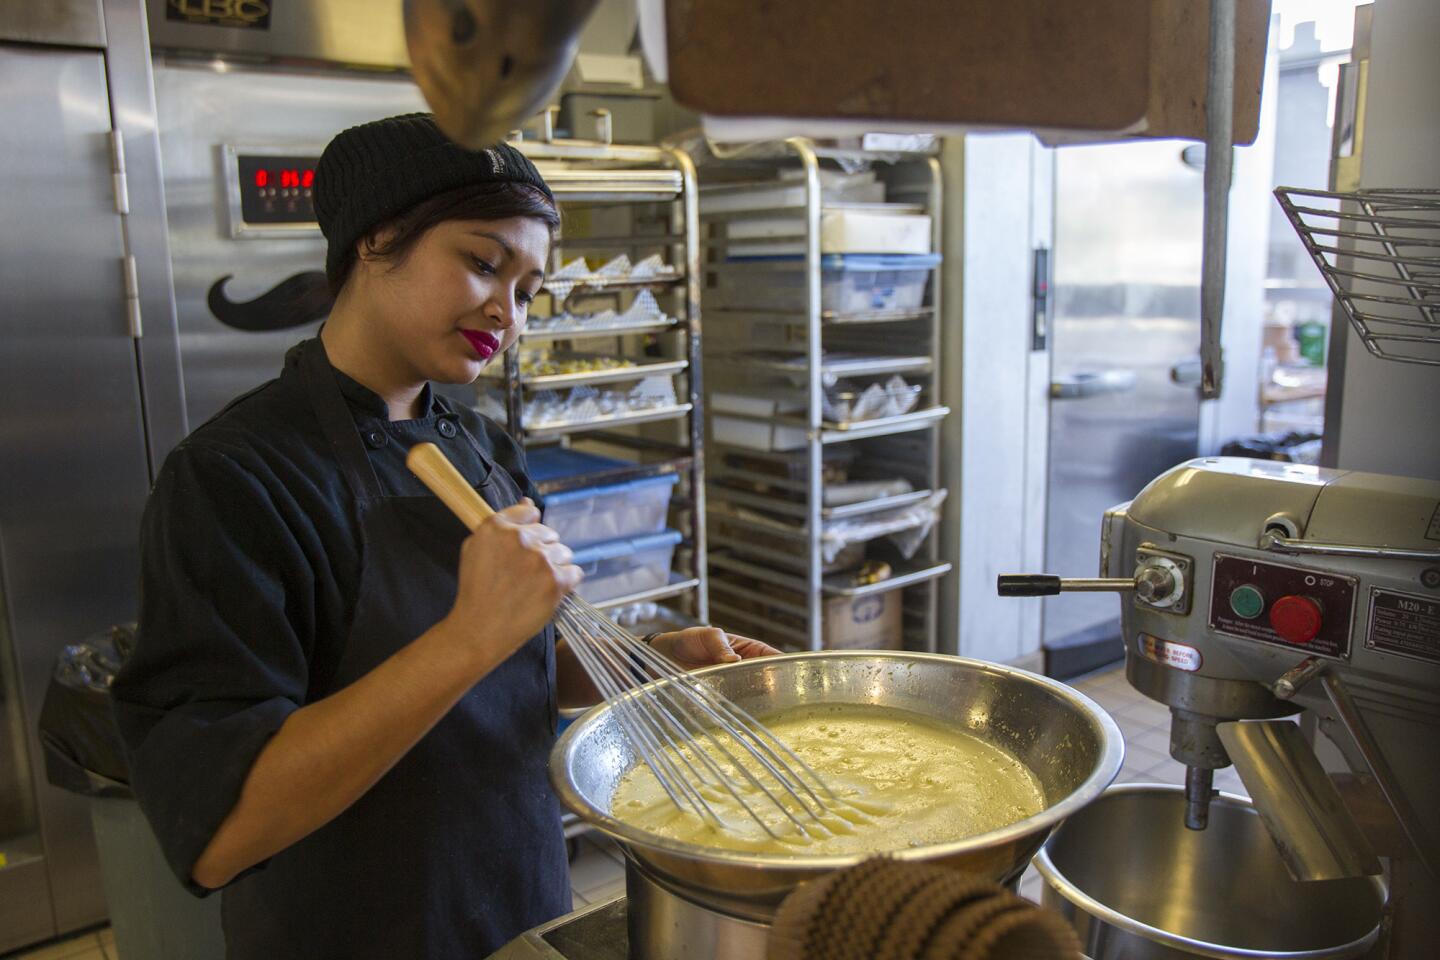 Denise Baquiran makes lemon curd at the Blackmarket Bakery during the one-year anniversary on Saturday, January 25. (Scott Smeltzer, Daily Pilot)